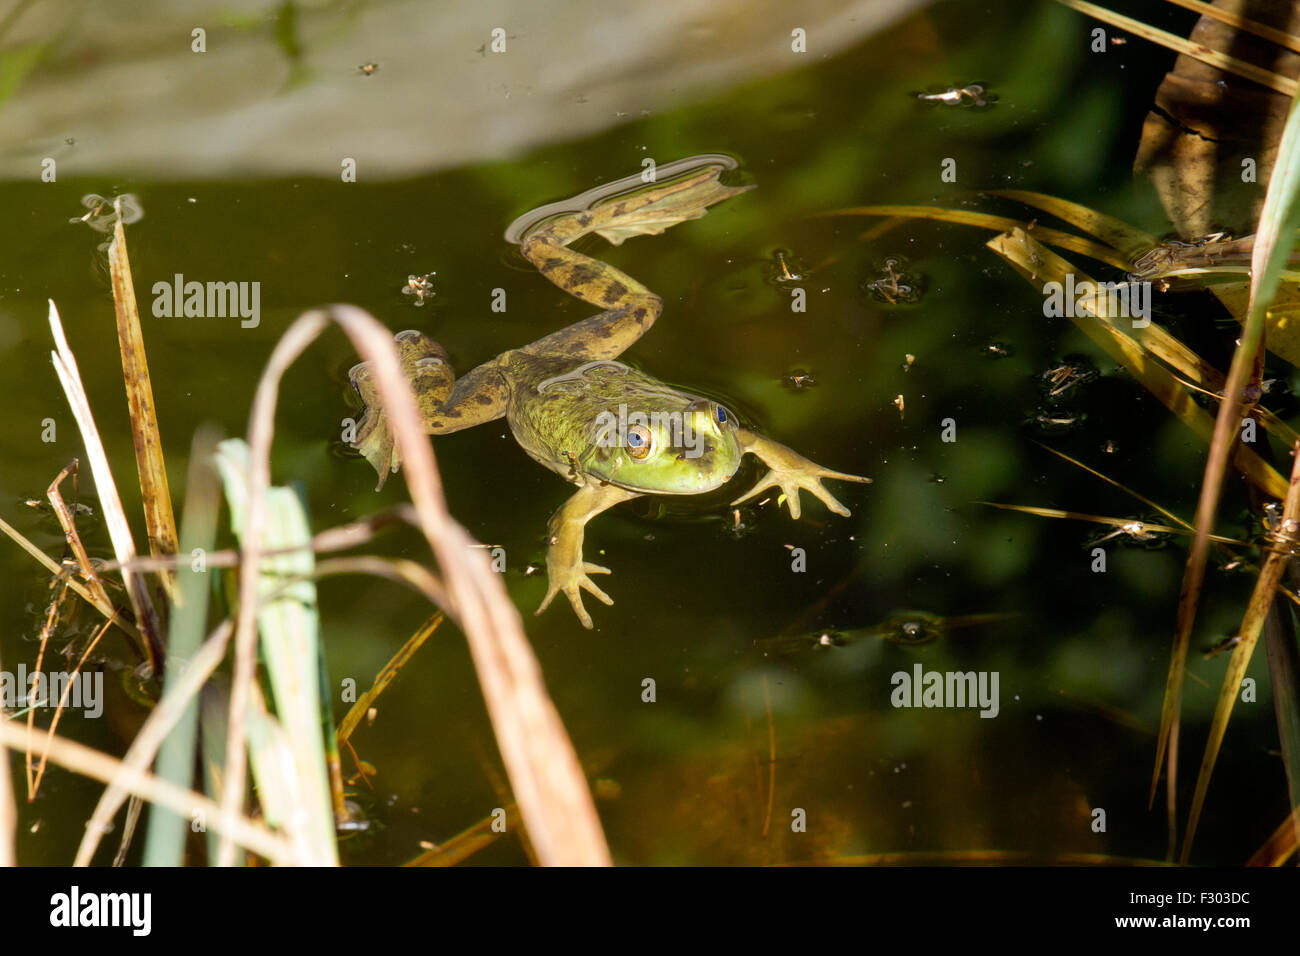 A frog swimming in a swamp Stock Photo